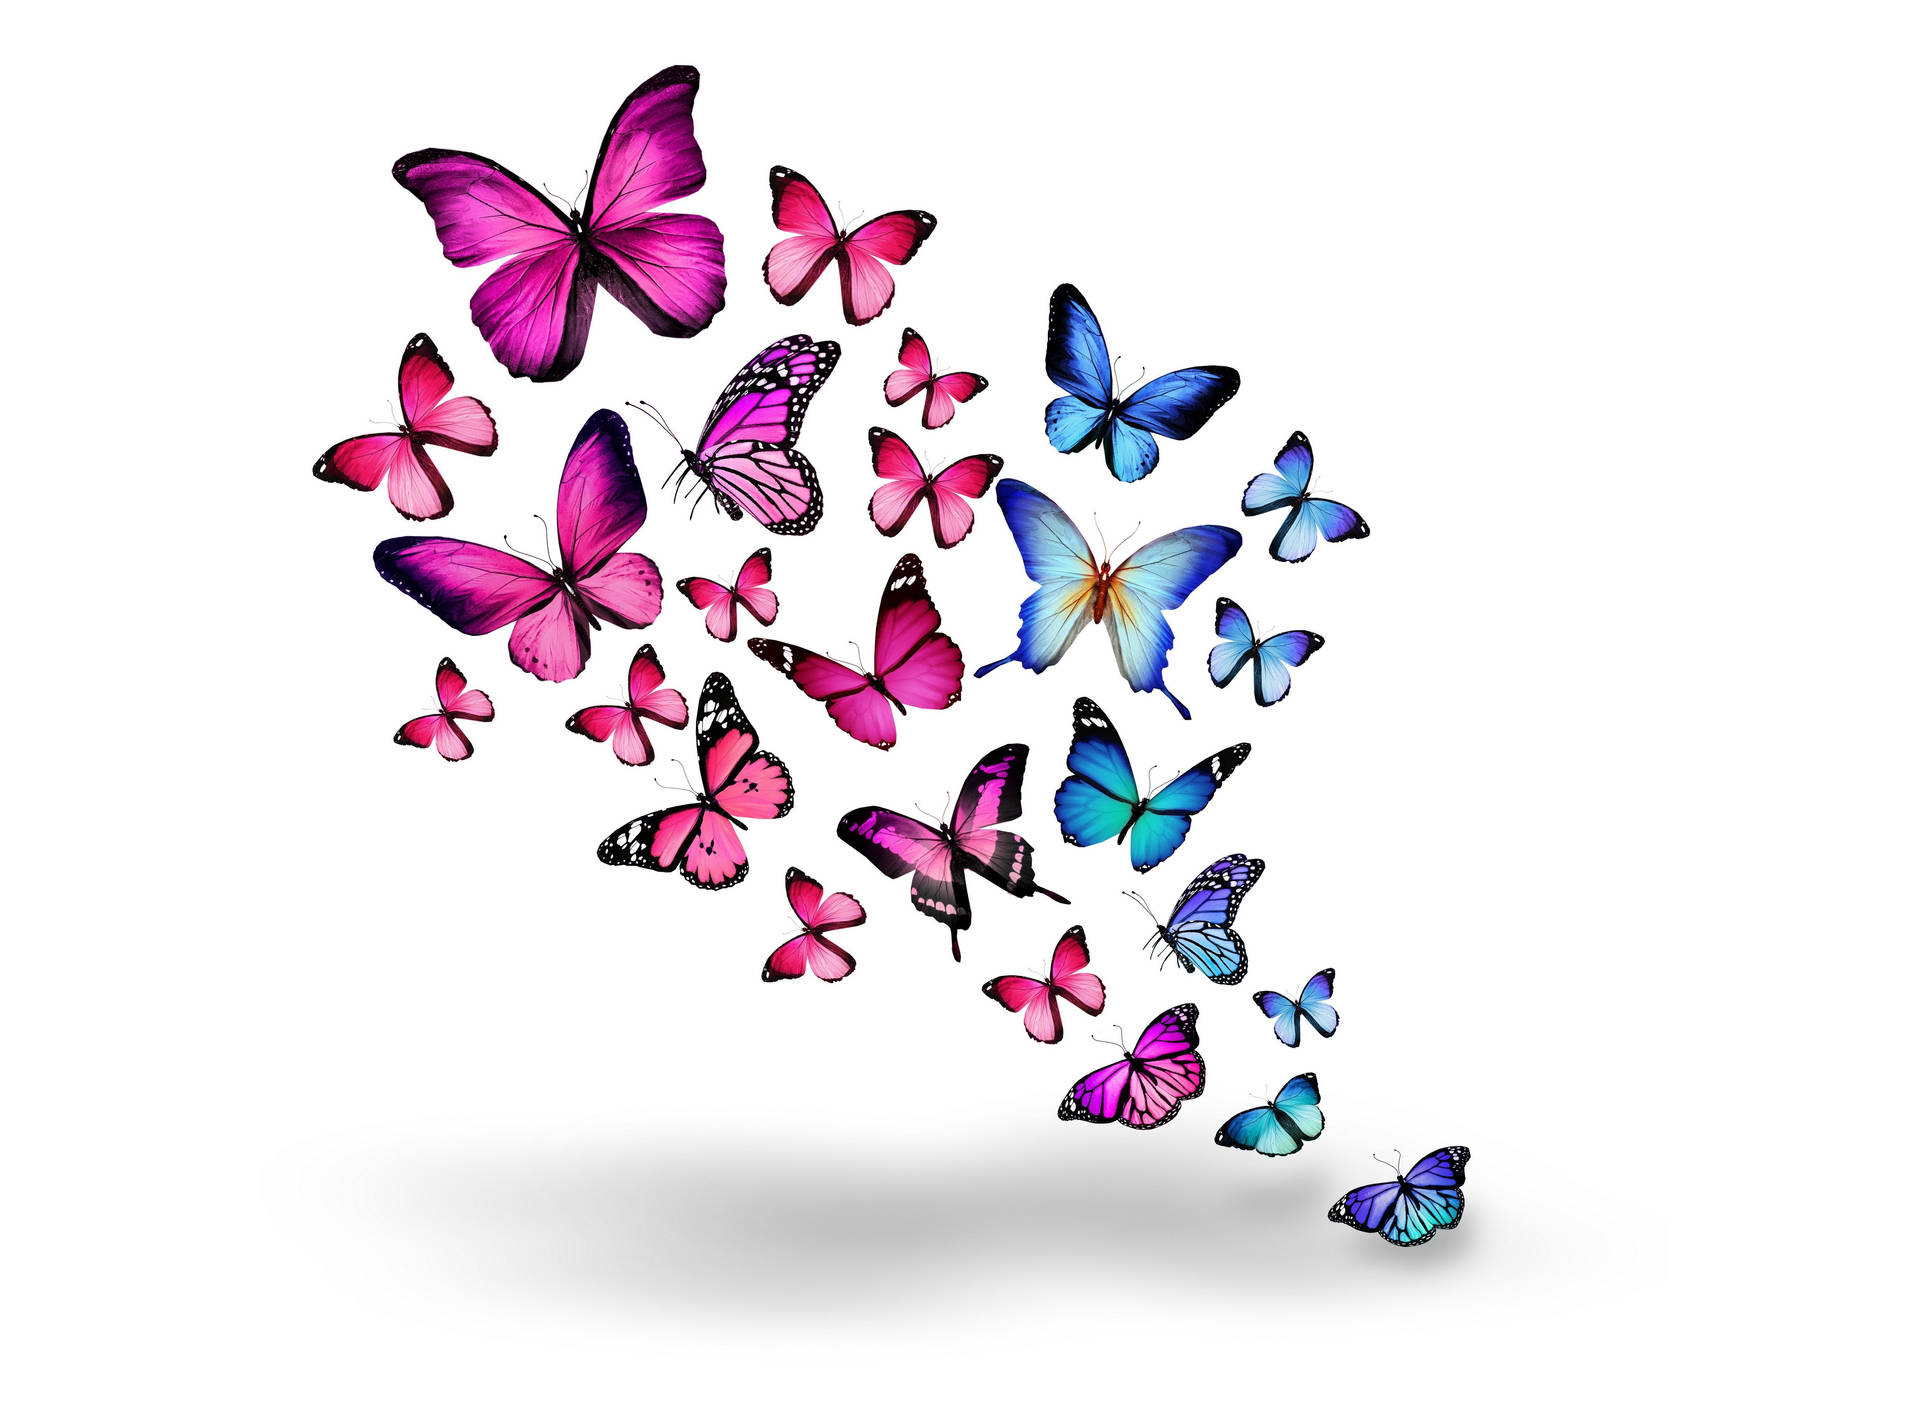 Swarm Of Pink And Blue Butterflies Wallpaper